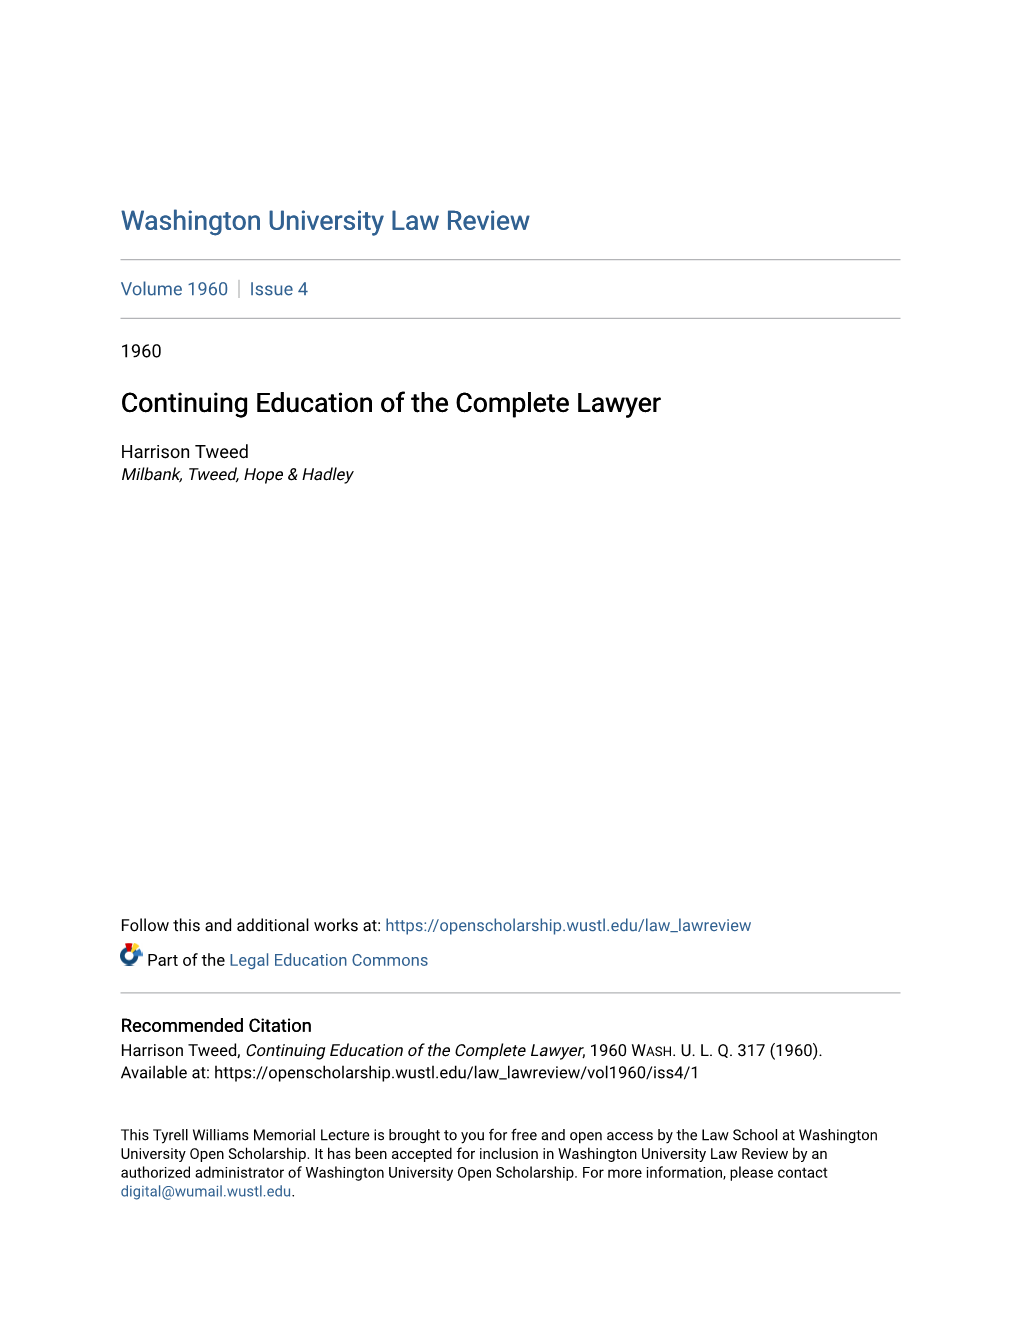 Continuing Education of the Complete Lawyer